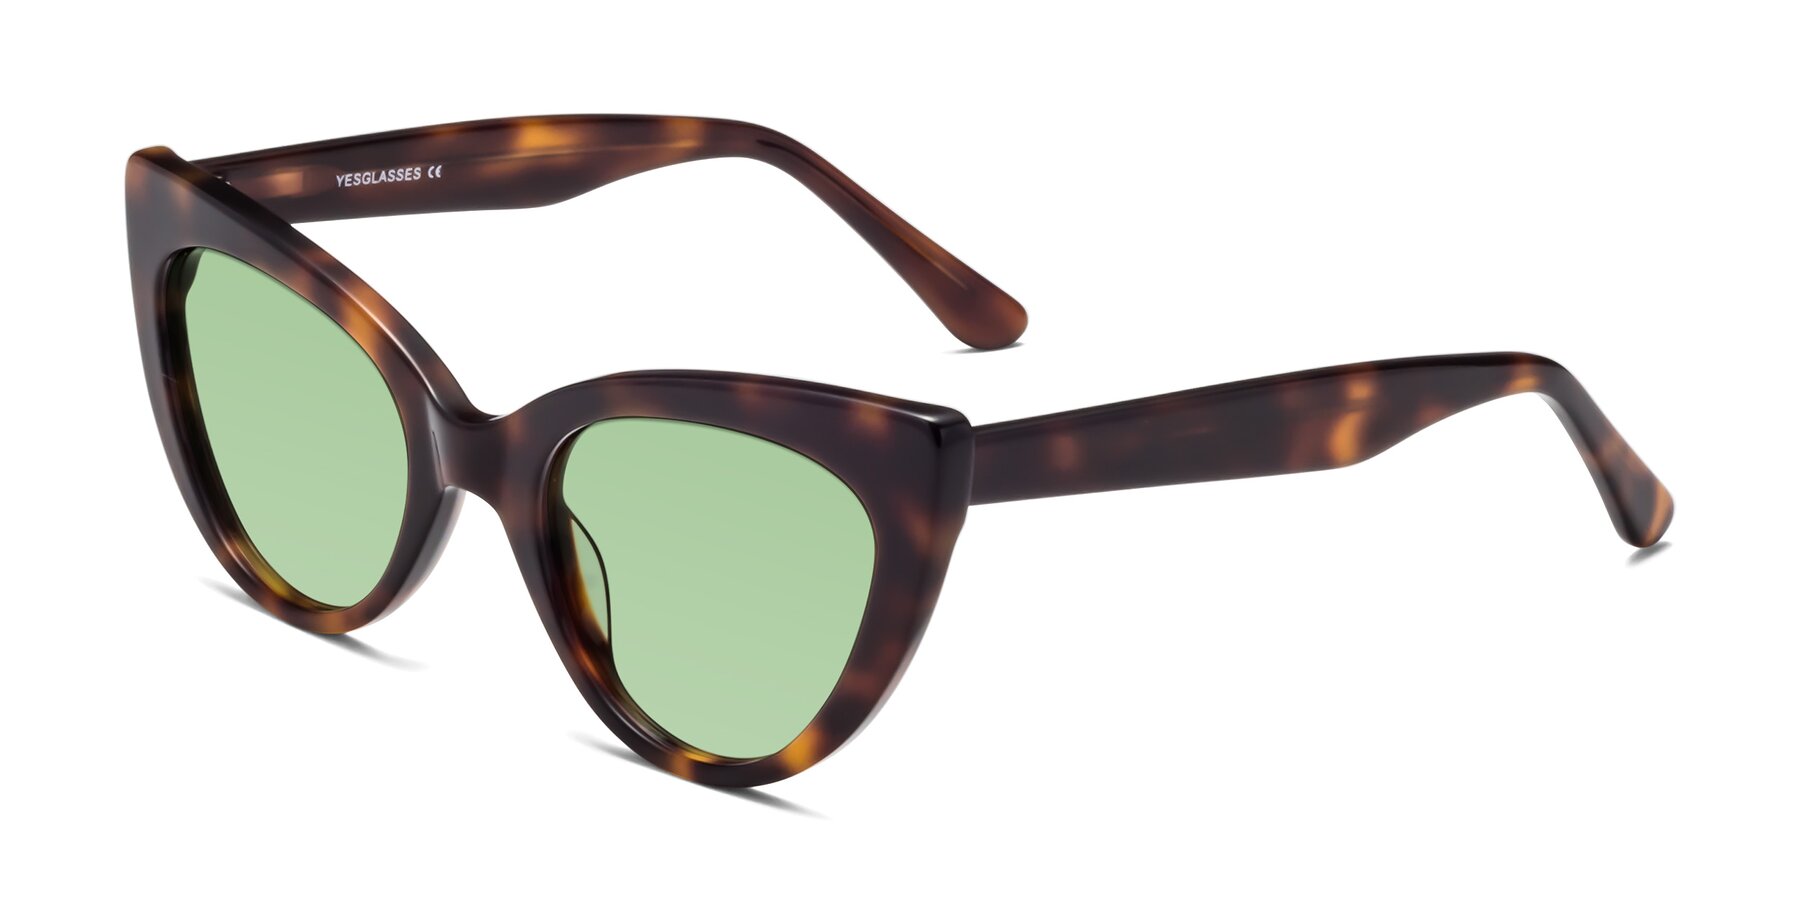 Angle of Tiesi in Tortoise with Medium Green Tinted Lenses